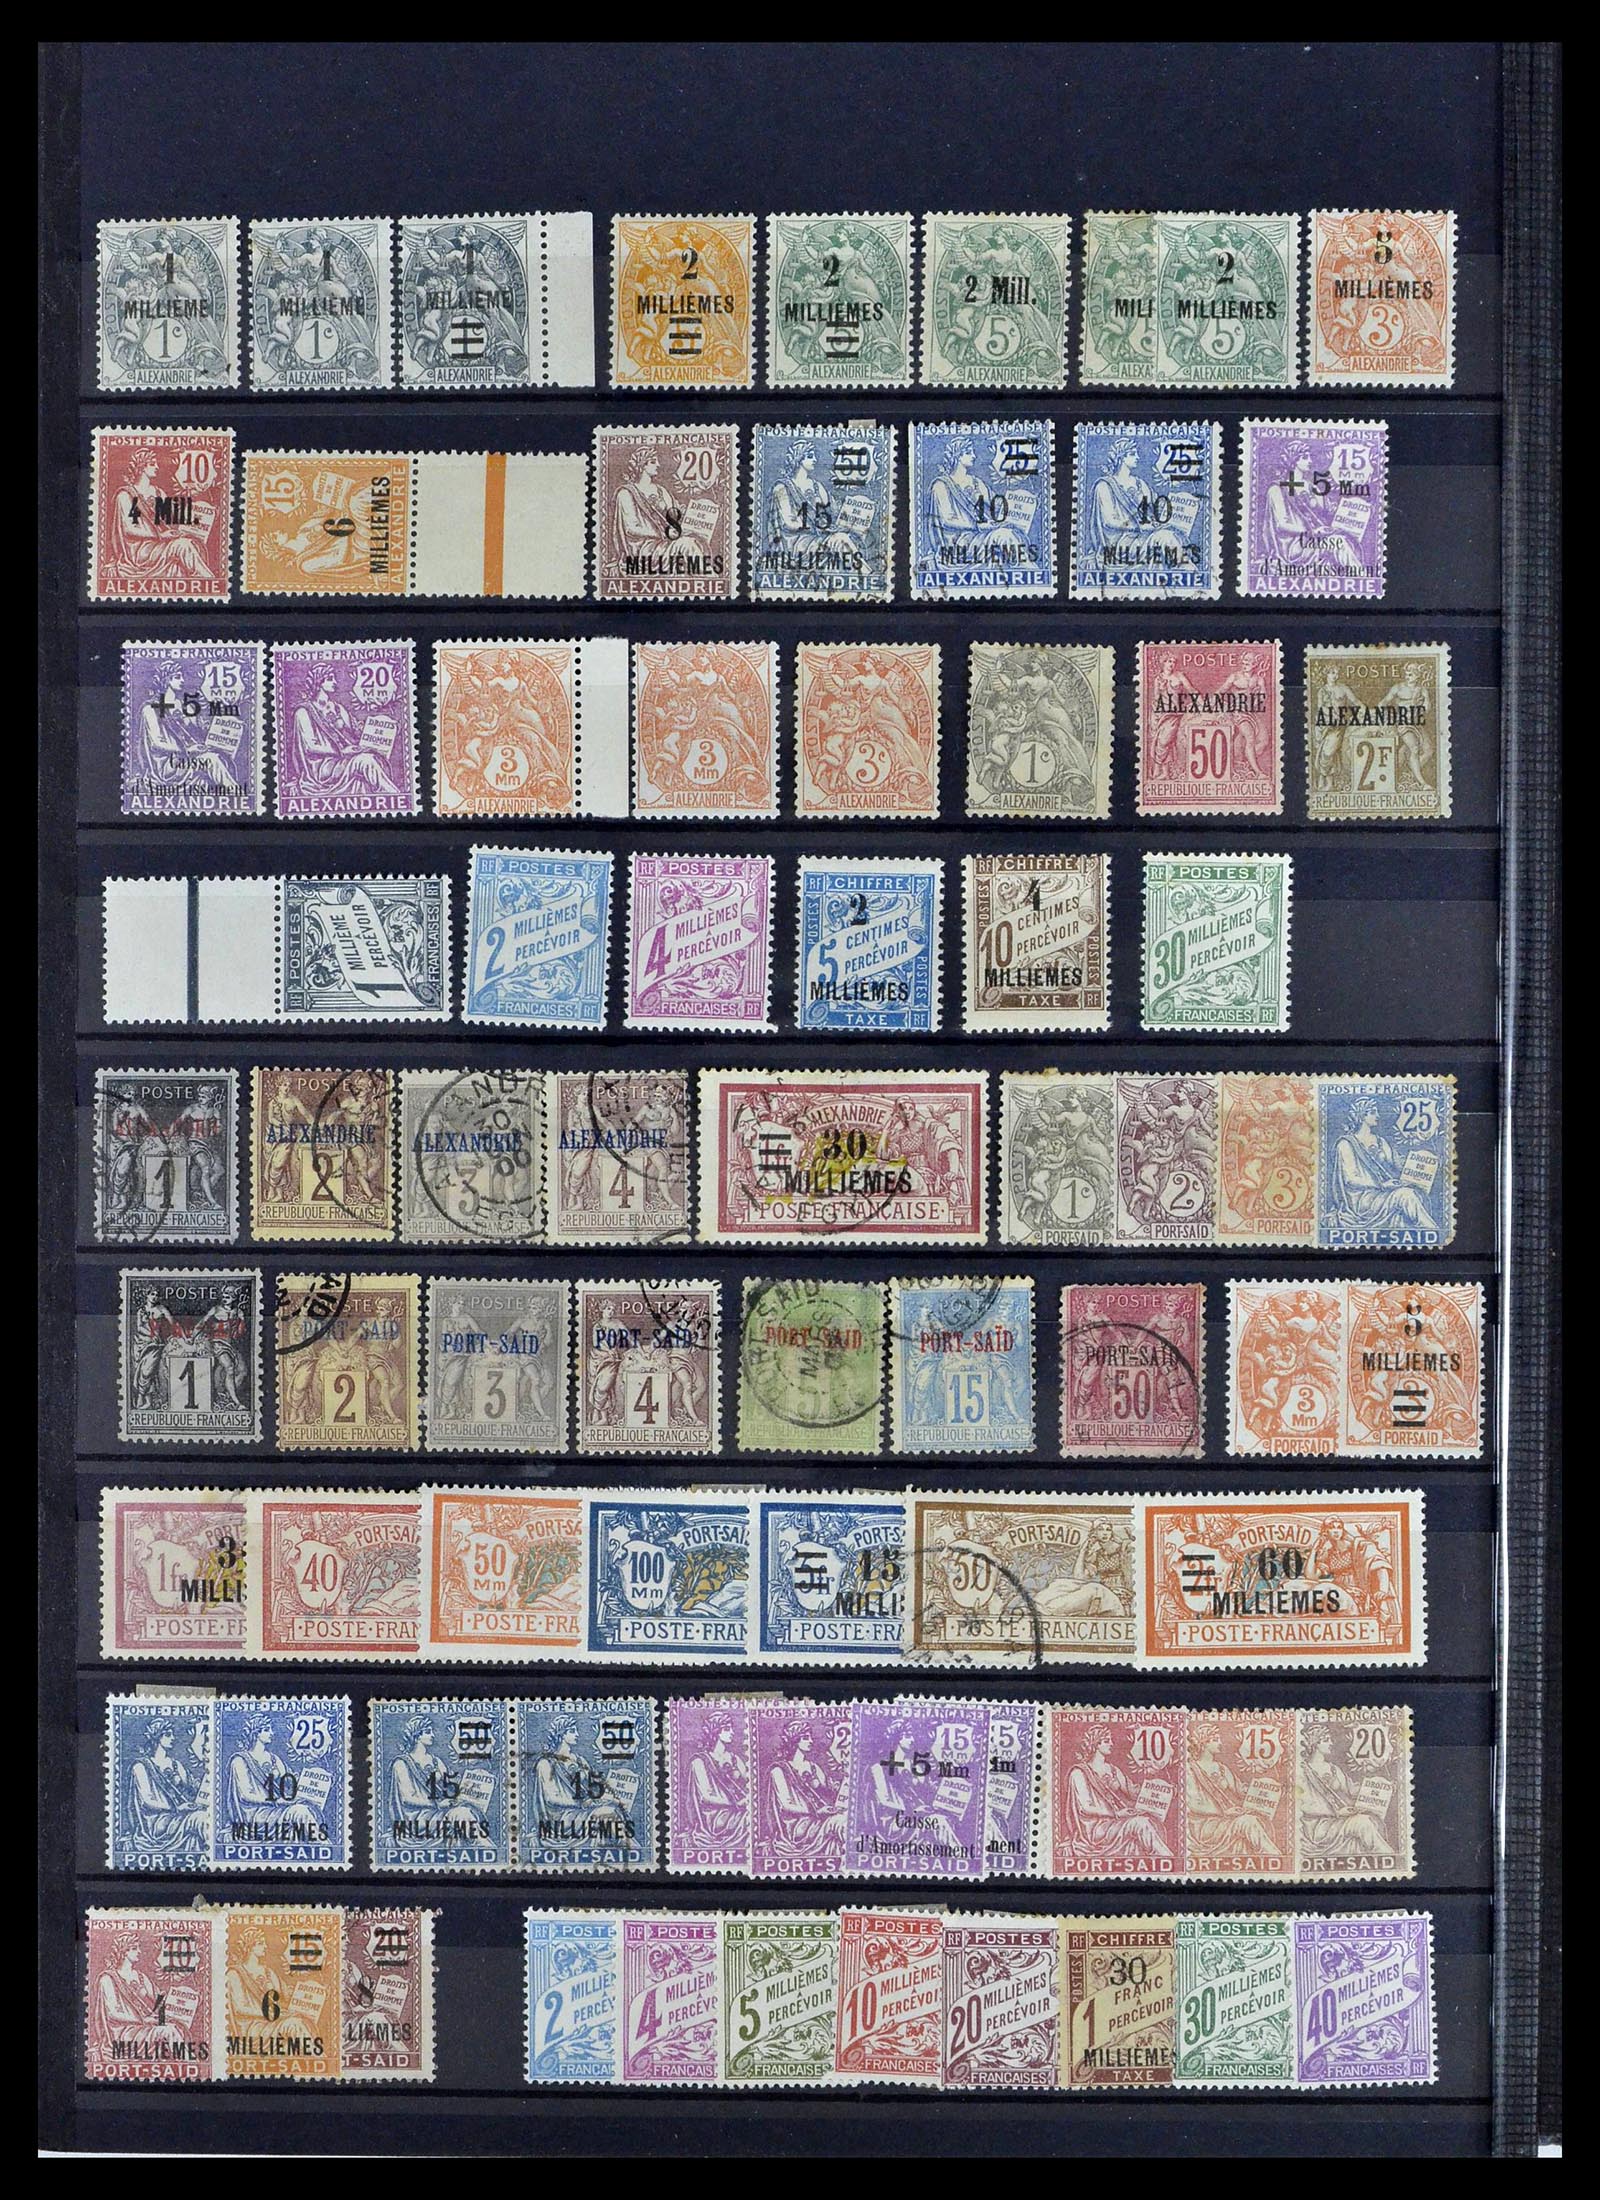 39097 0016 - Stamp collection 39097 French colonies 1880-2000.